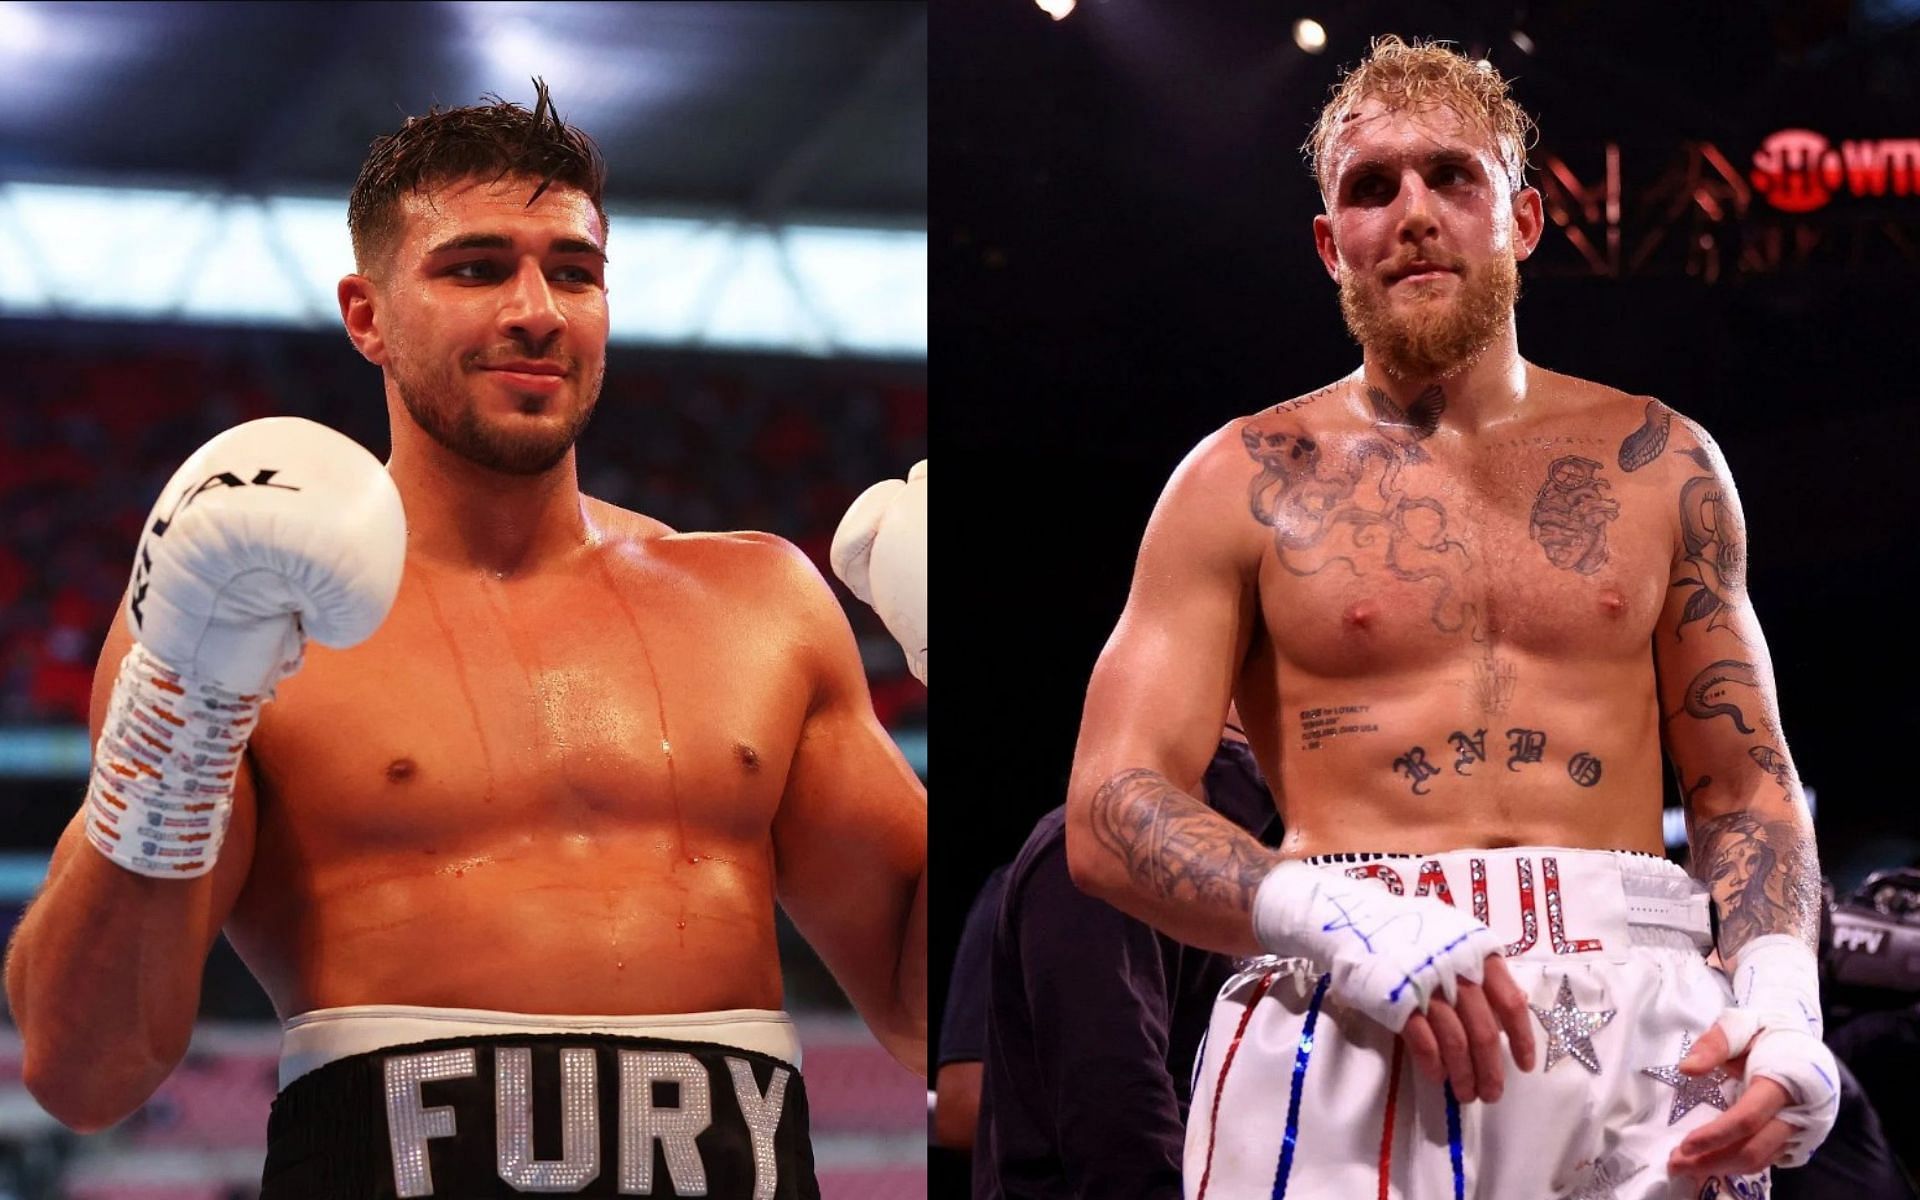 Tommy Fury Tommy Fury tells Jake Paul “Ill fight you for free next month”